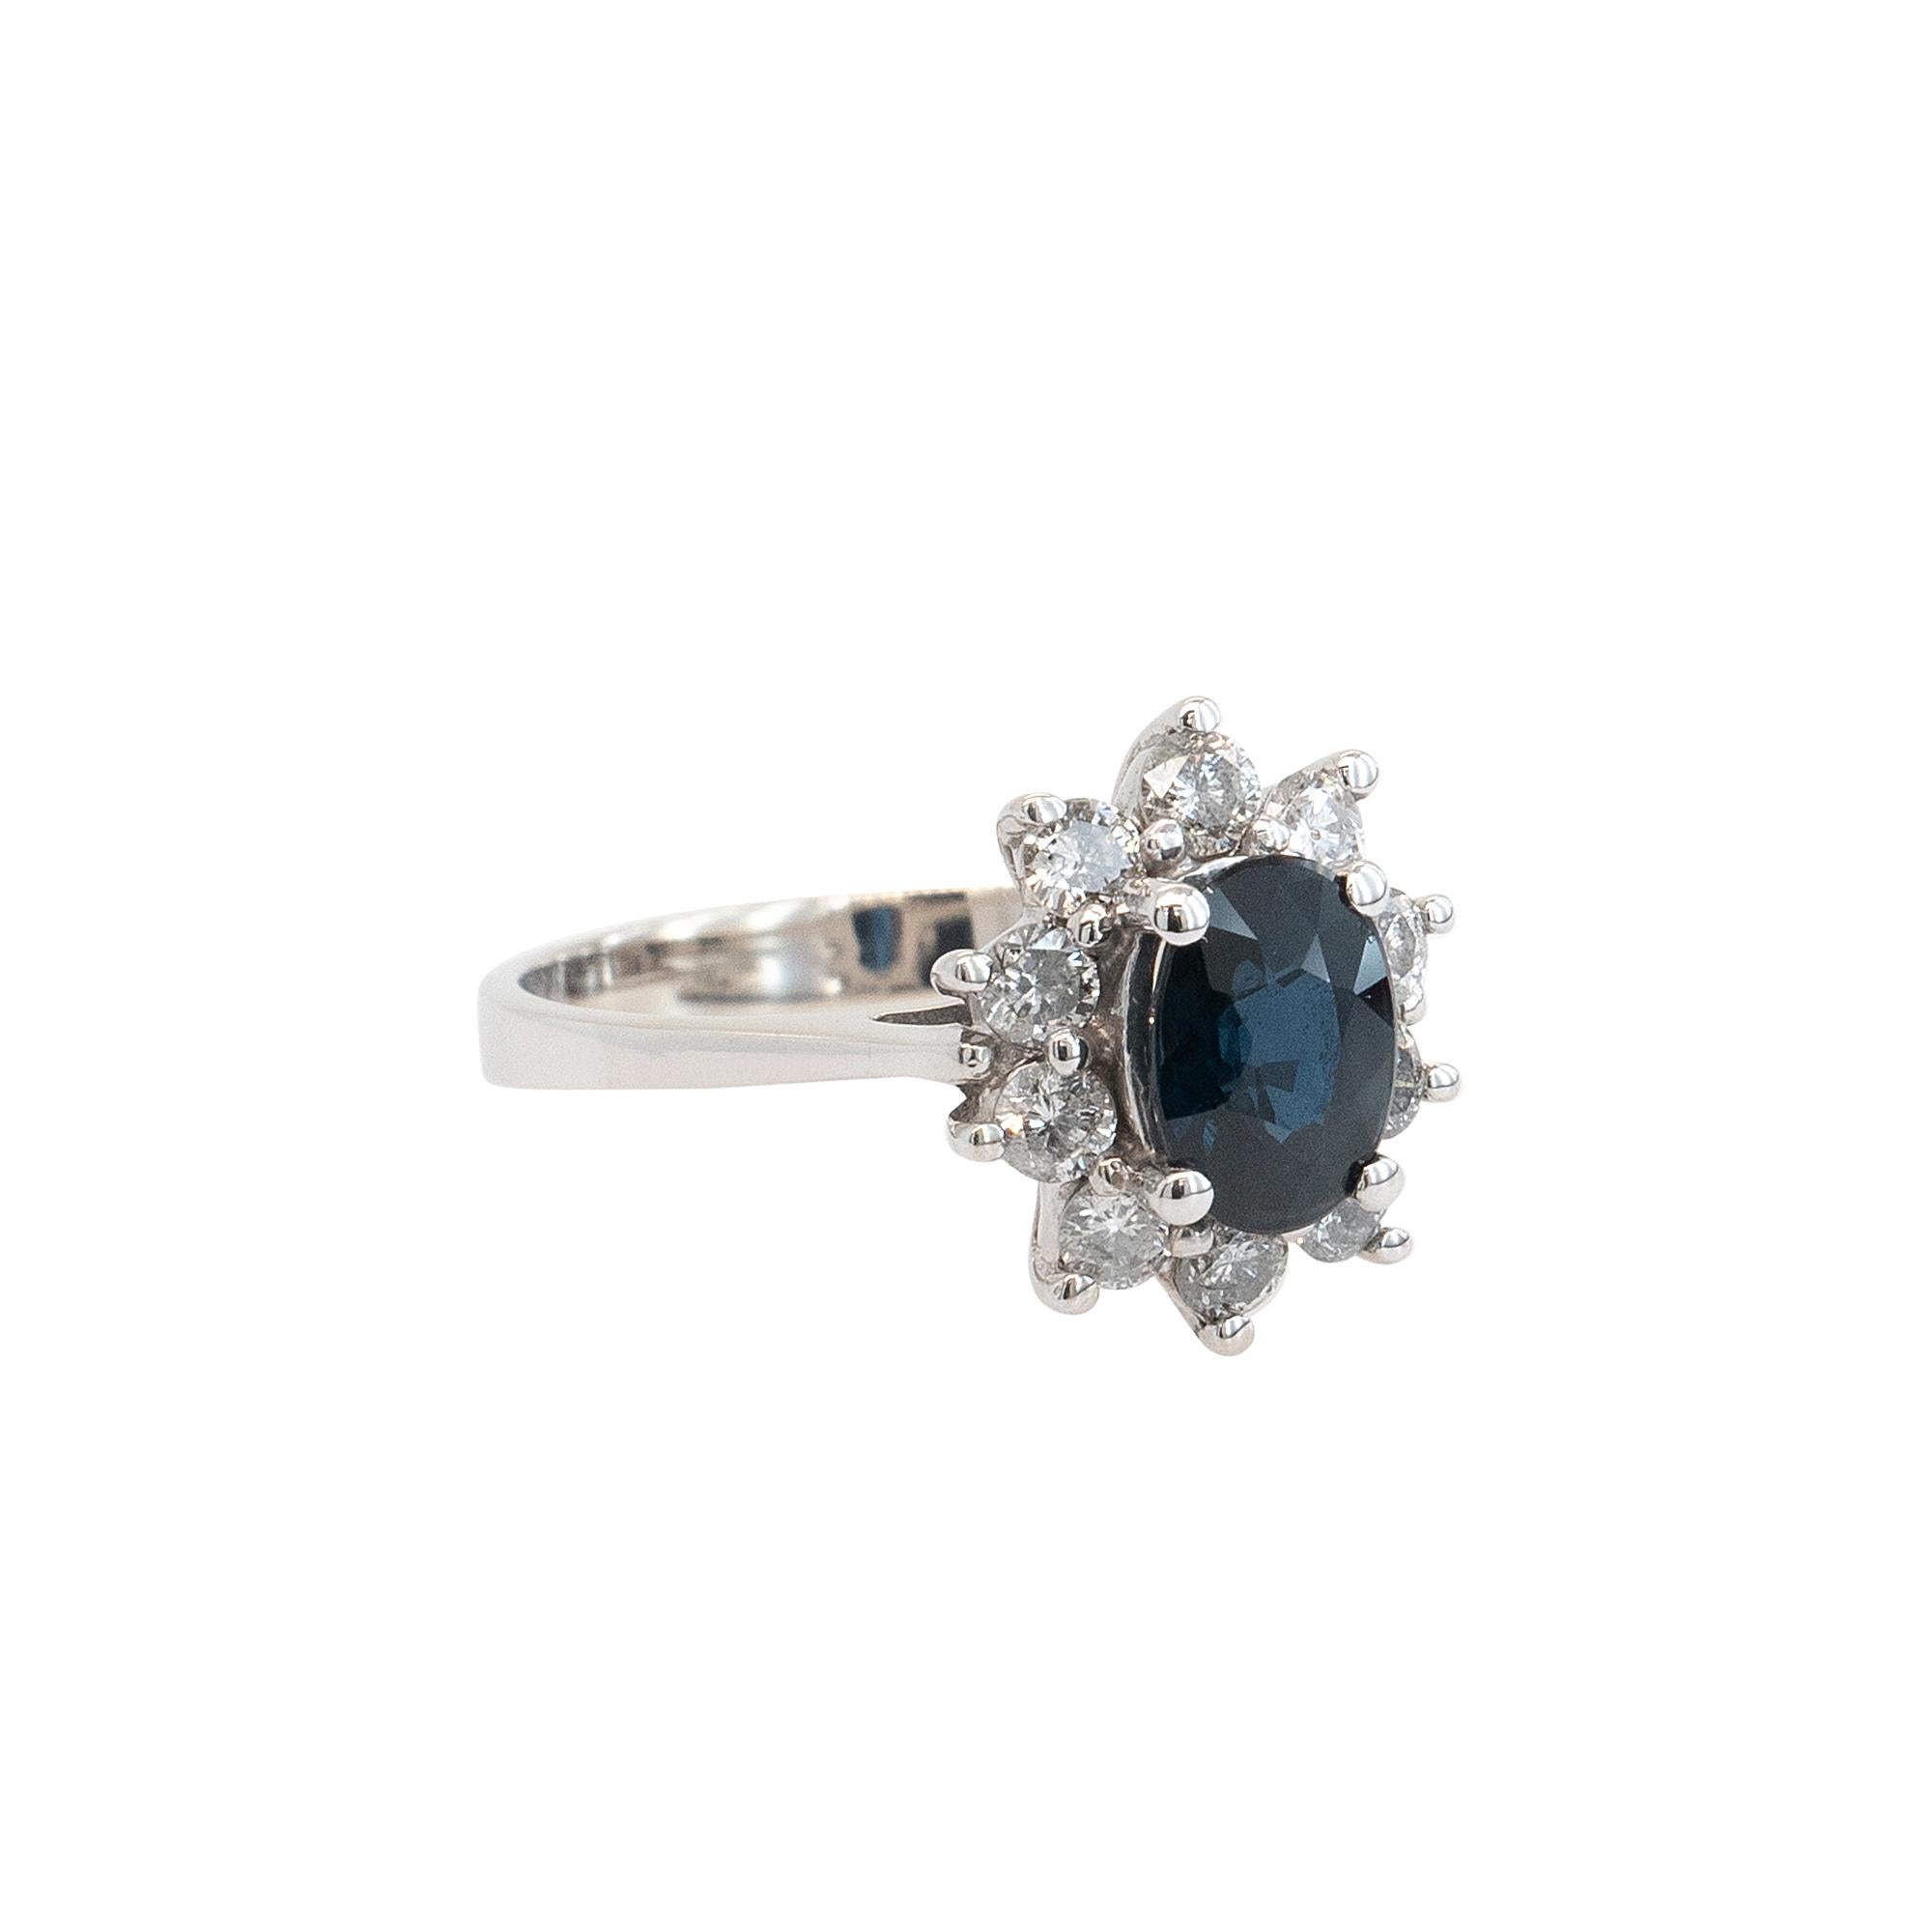 Center Details: 0.60ctw Oval Sapphire
Ring Material: 	
14k White Gold
0.40ctw Natural Round Brilliant Cut Diamonds (10 Diamonds)
Diamonds are G/H color and SI clarity
19mm x 24mm
Ring Size: 5.75 (can be sized)
Total Weight: 3.9g (2.5dwt)
This item